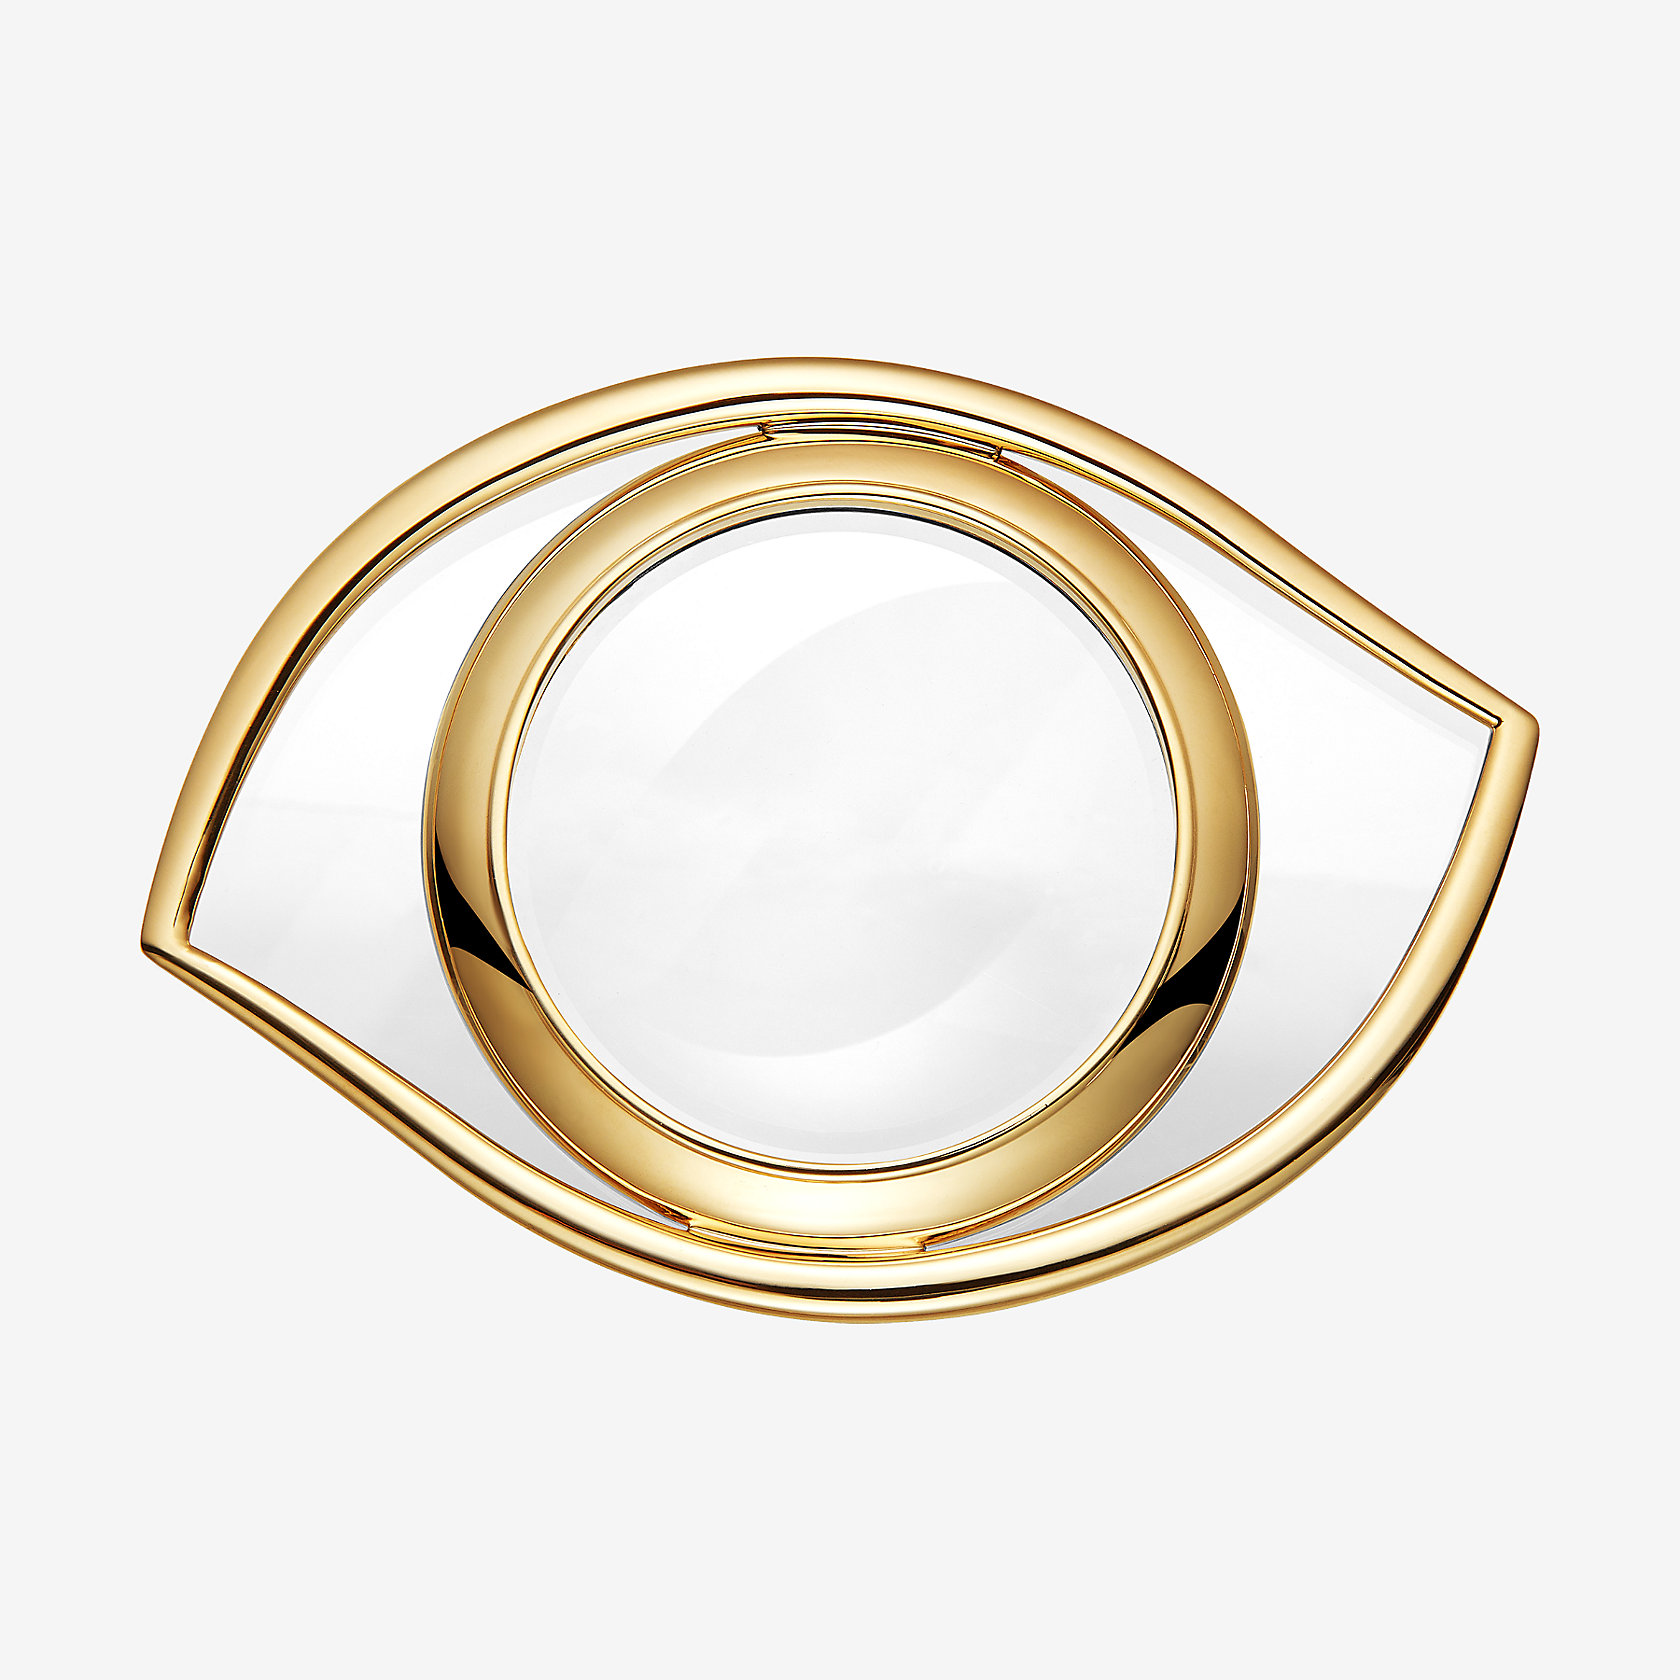 Oeil magnifying glass | Hermes USA